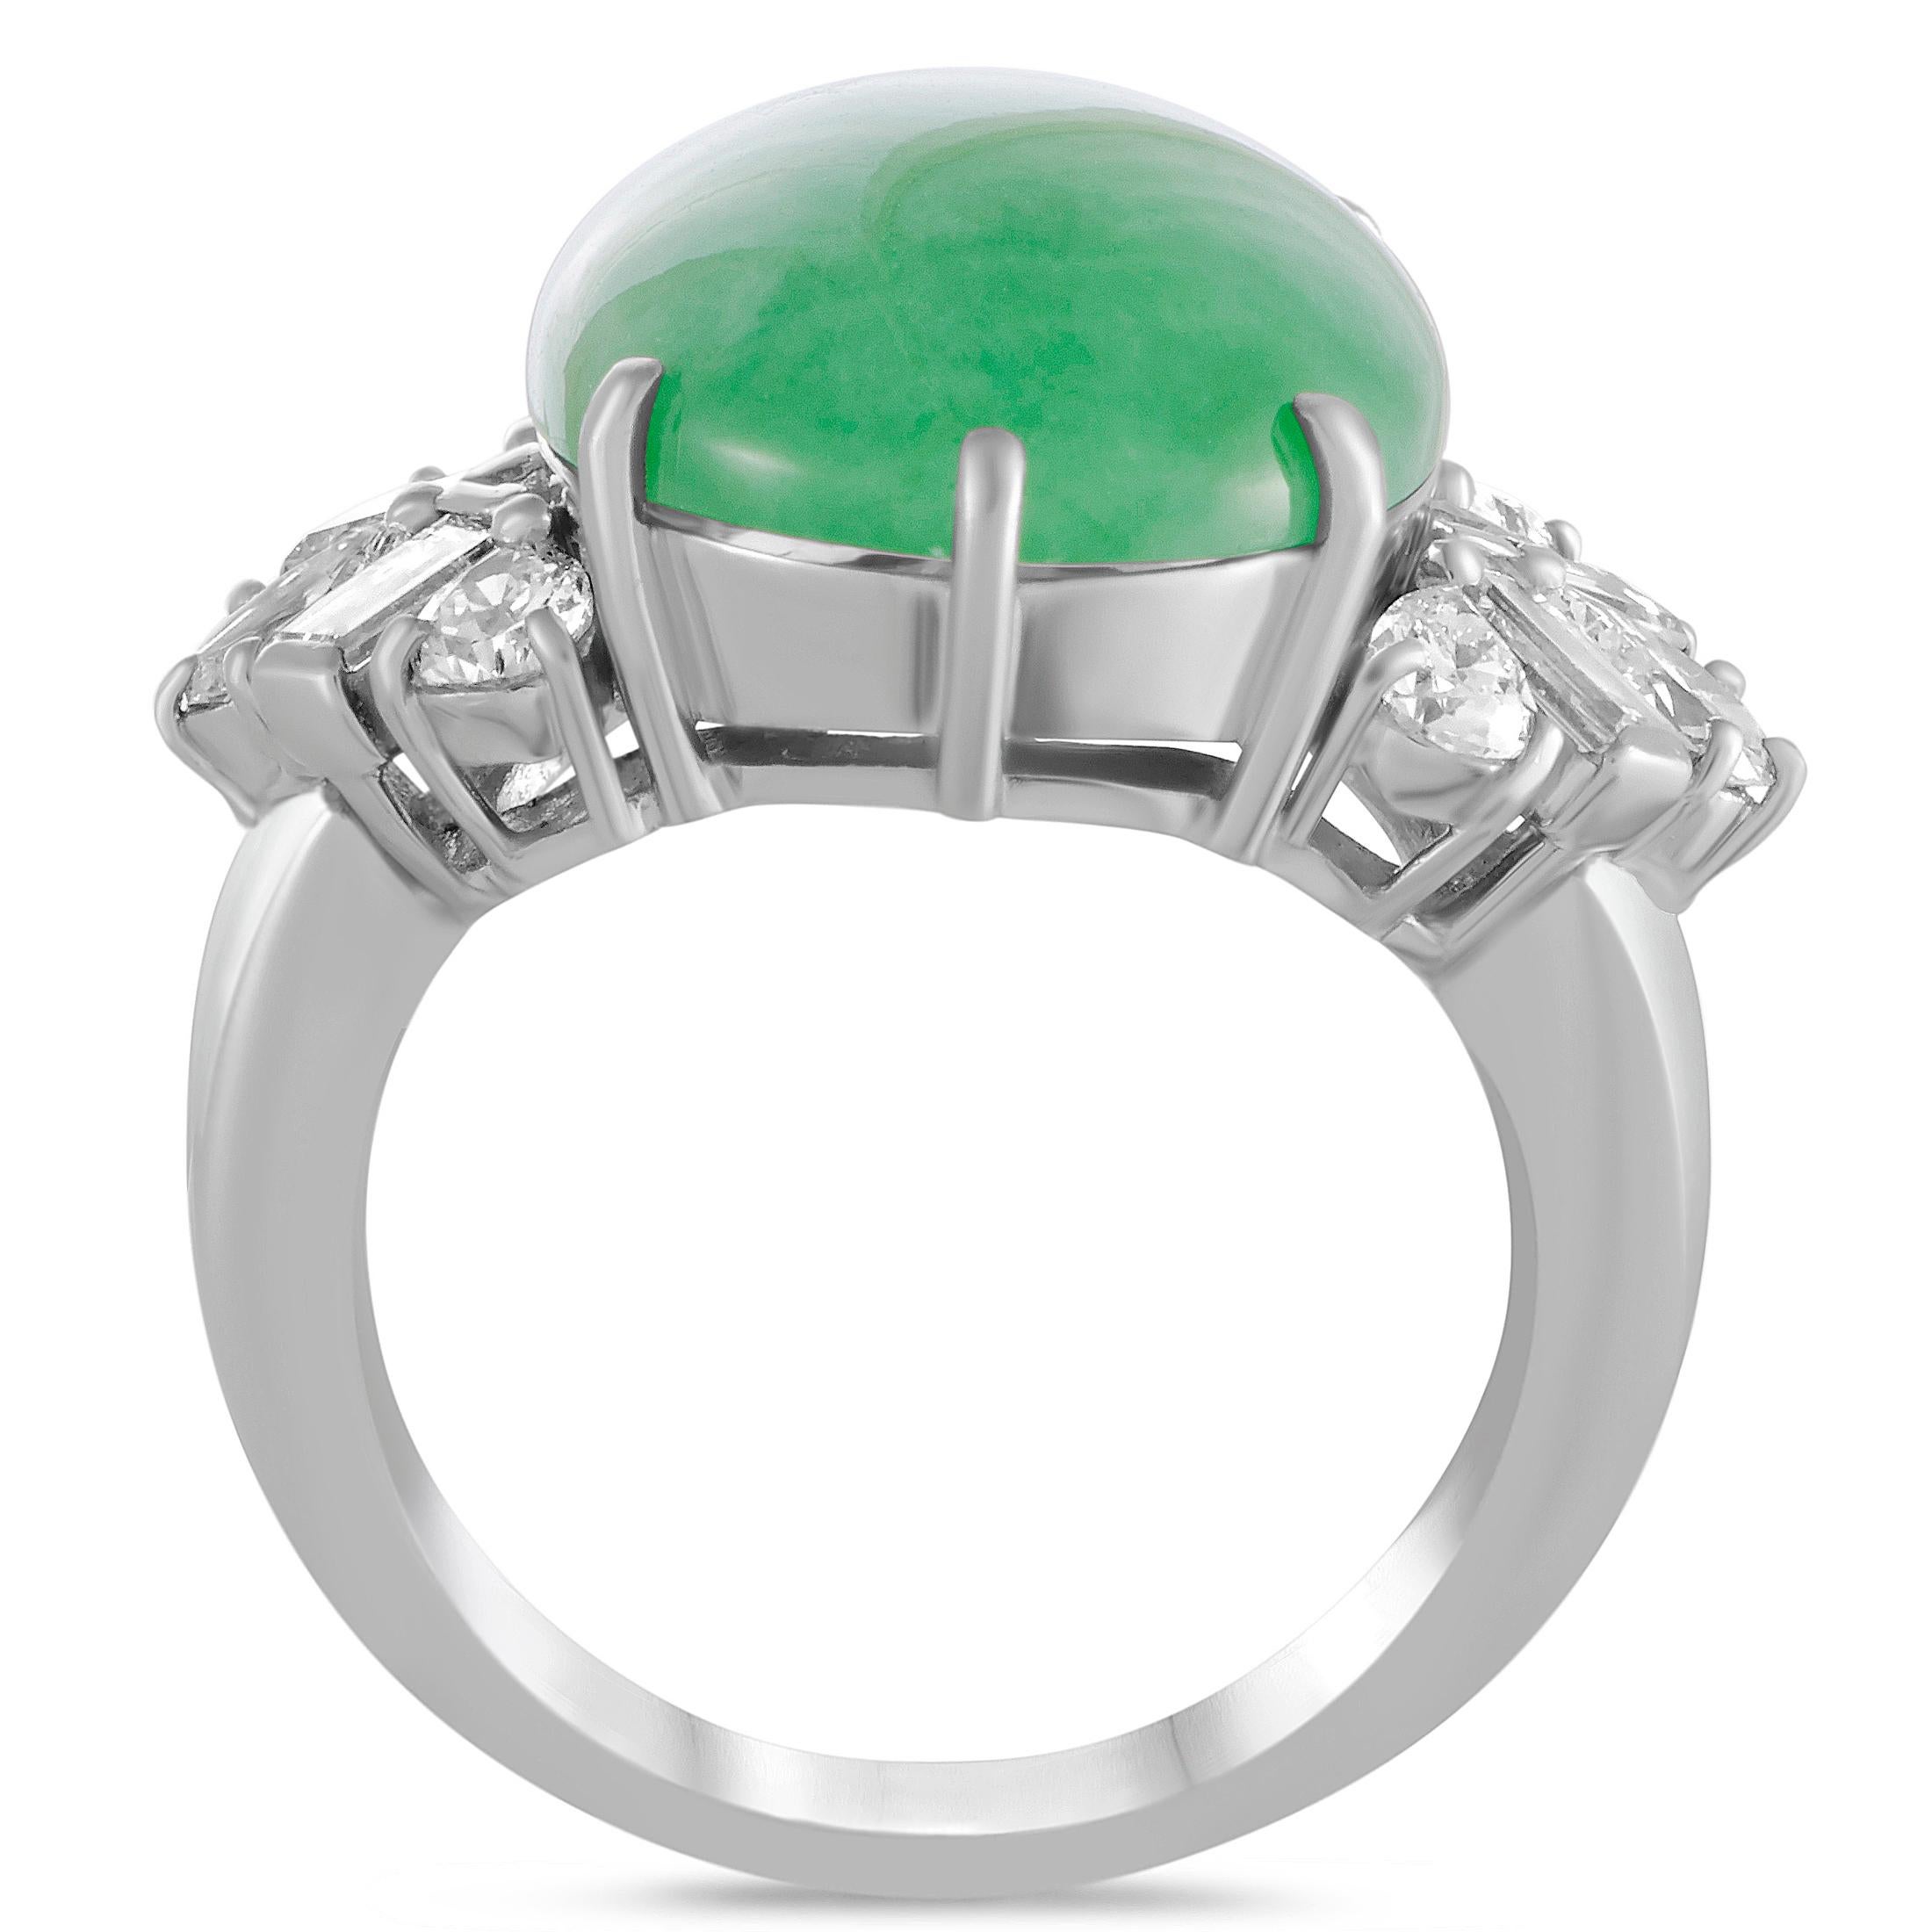 Boasting appealing color and charming resplendence, this fascinating ring is exquisitely crafted from precious platinum and embellished with lustrous diamonds weighing in total 1.57 carats as well as a stunning green jade weighing 13.22 carats.
Ring